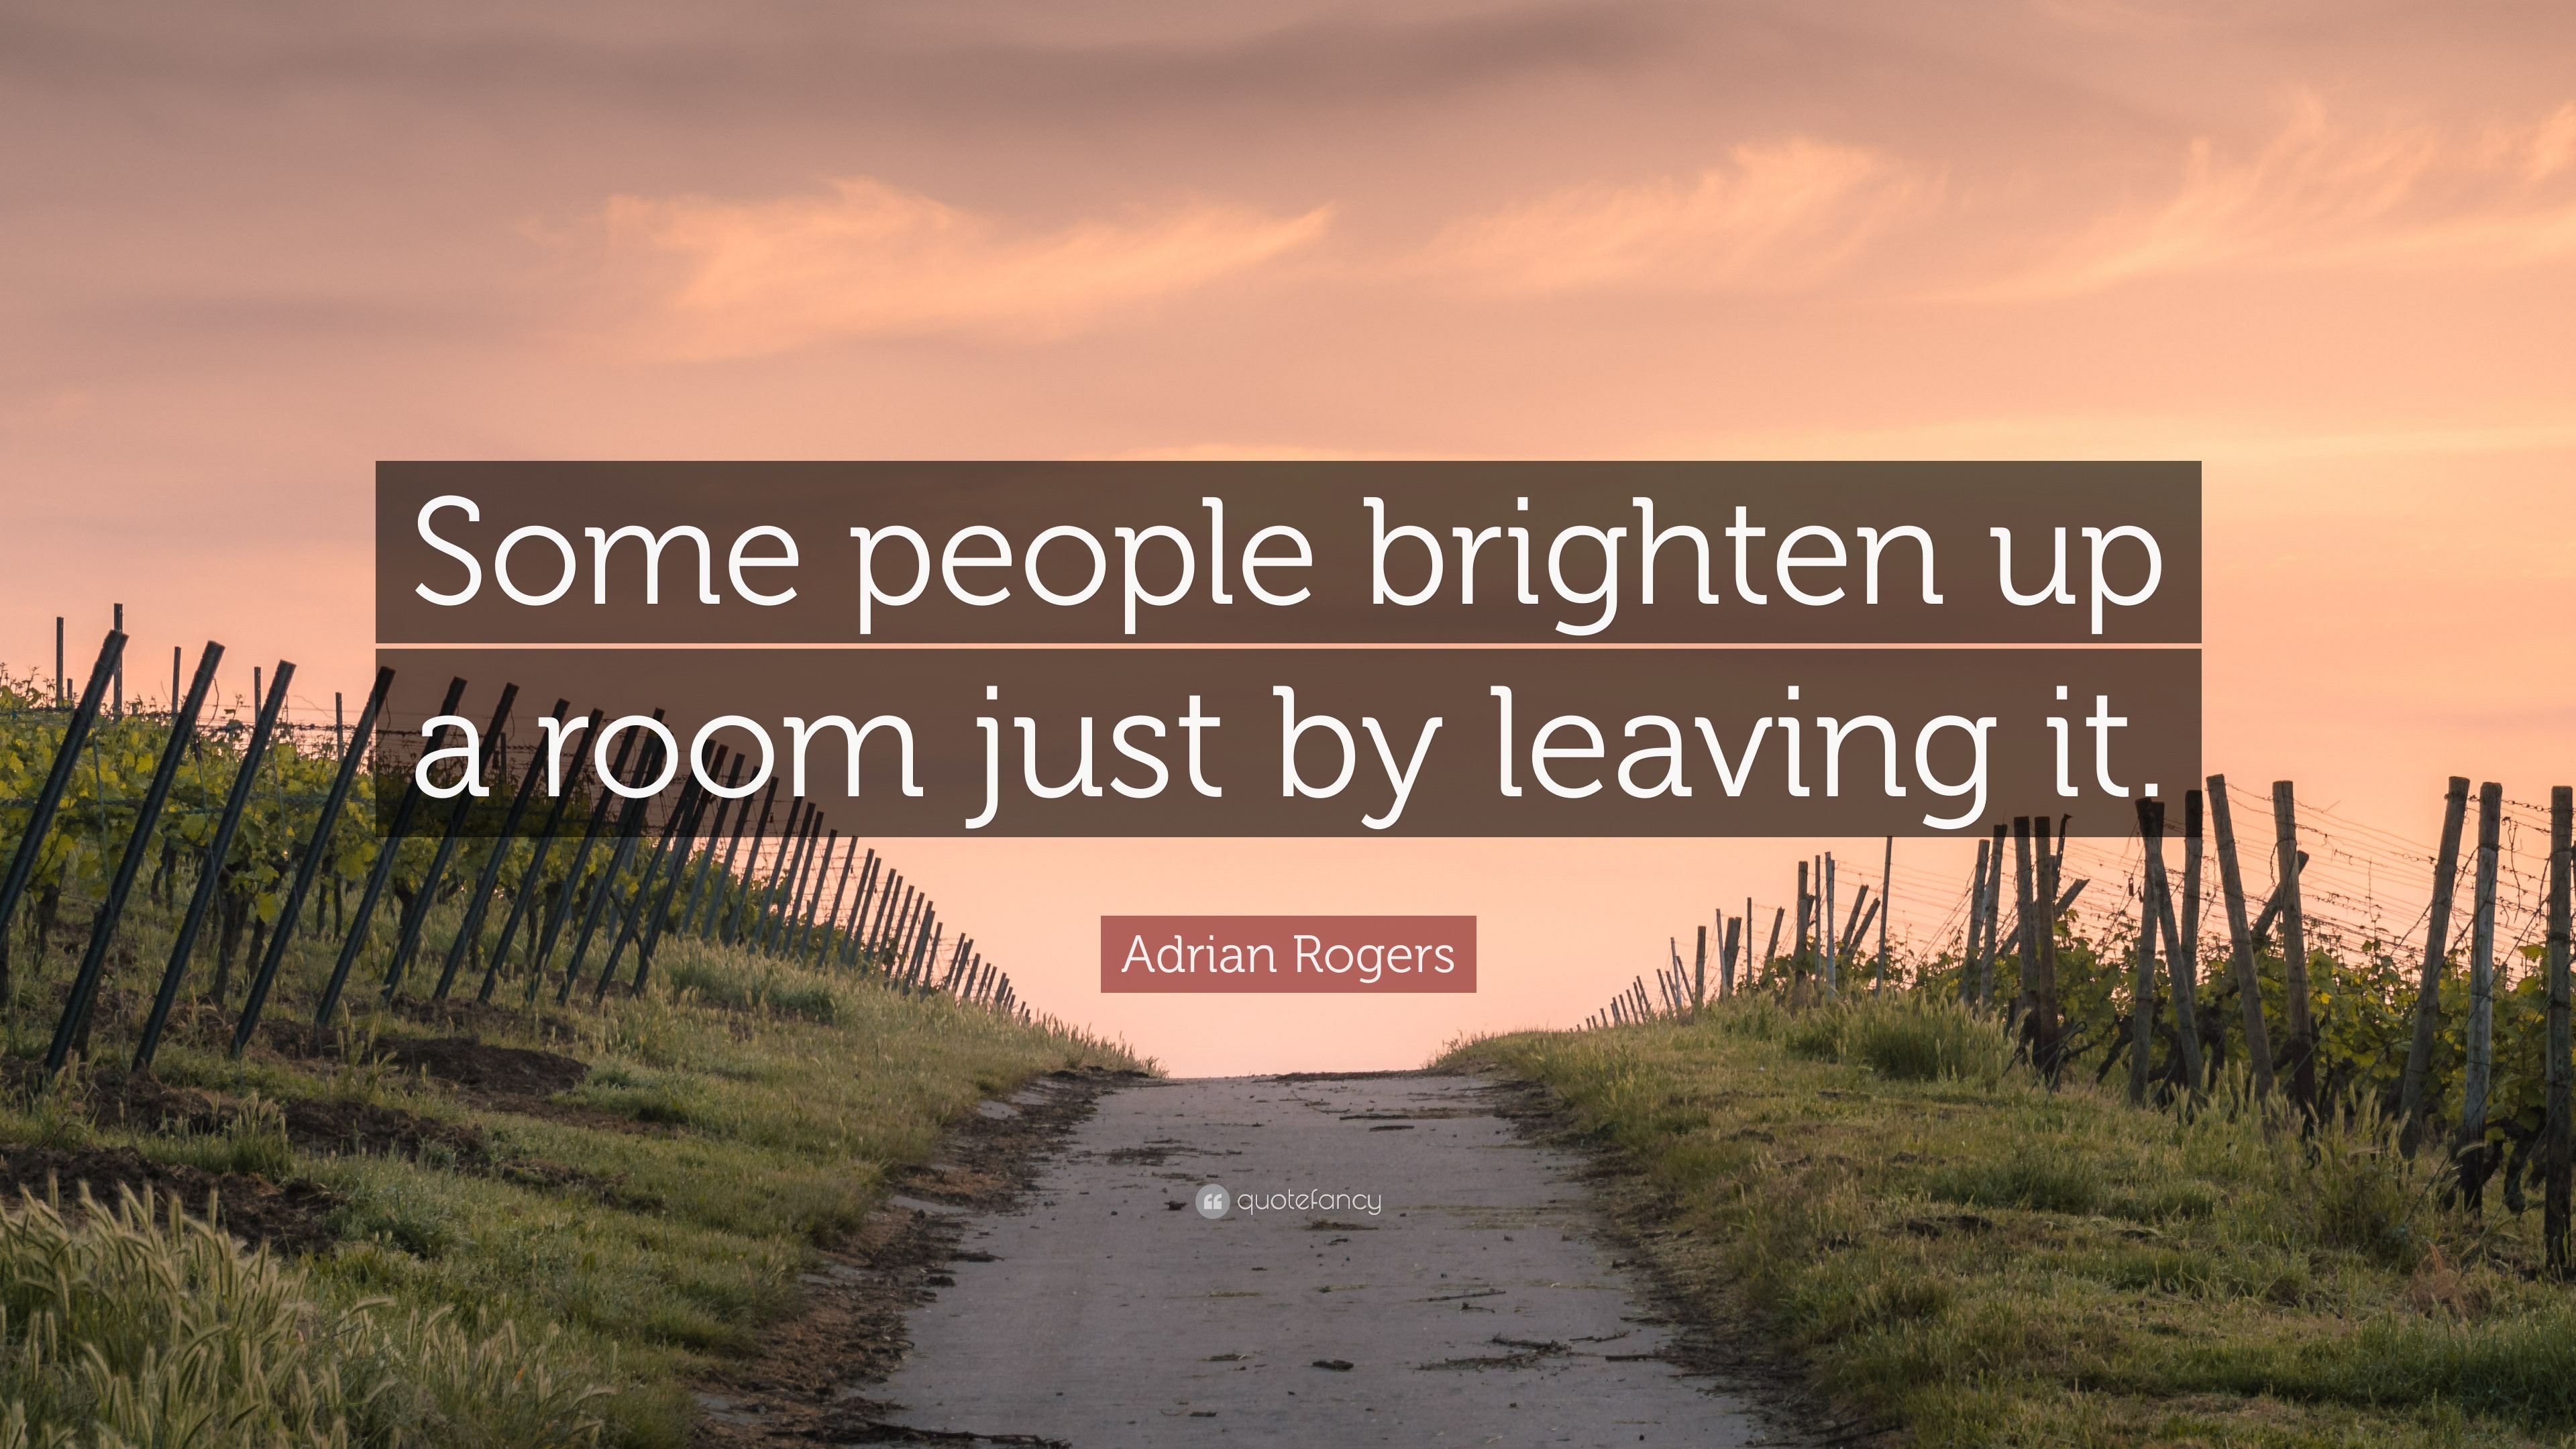 3853722 Adrian Rogers Quote Some people brighten up a room just by leaving